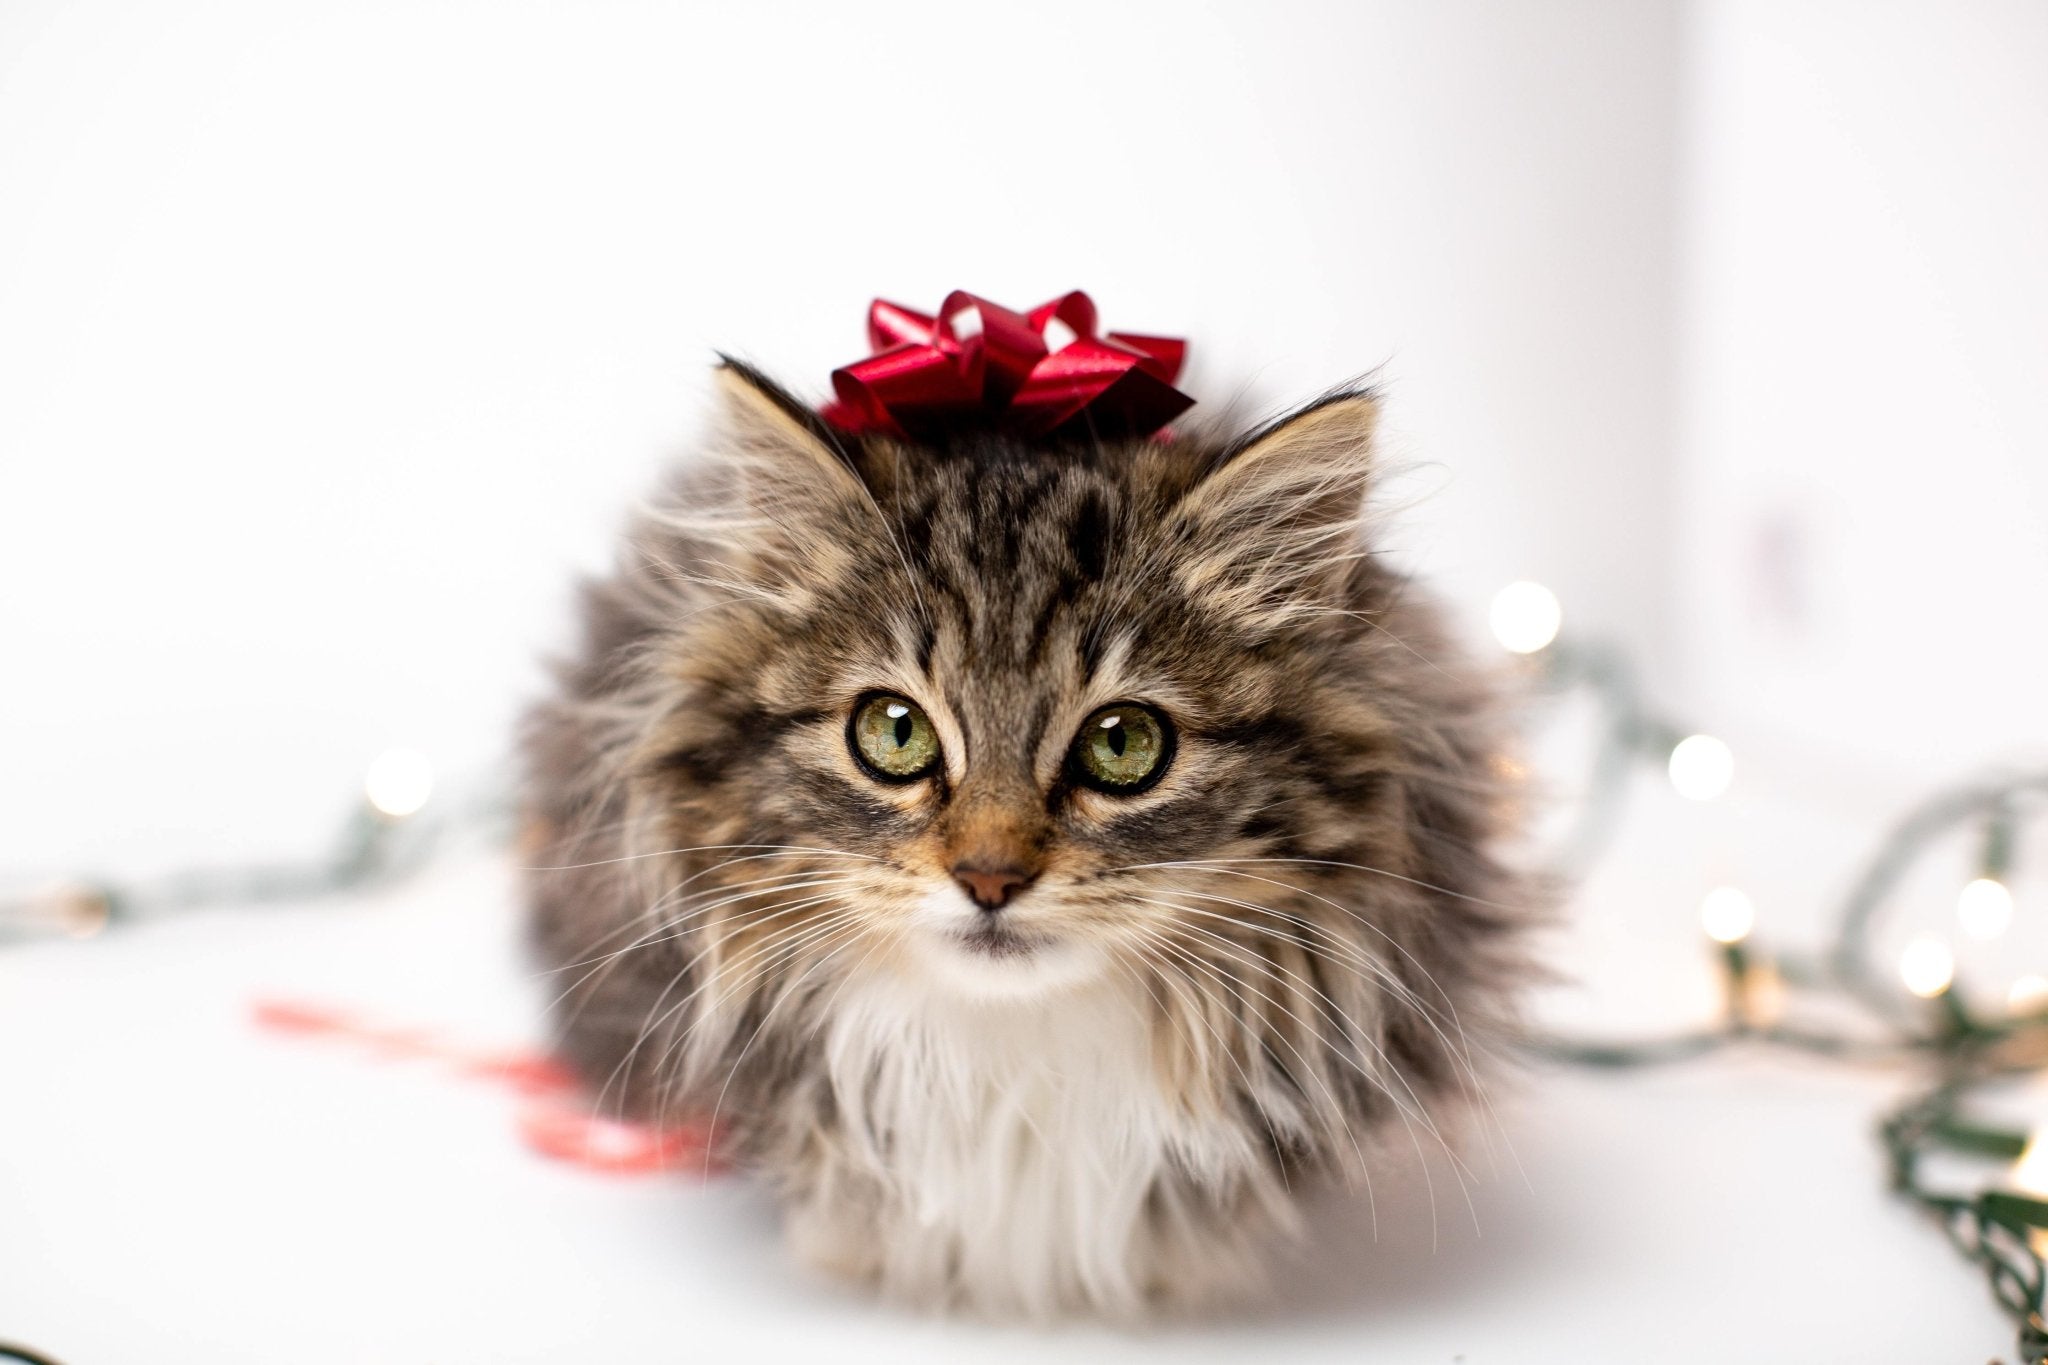 The best Christmas gifts for cats and dogs